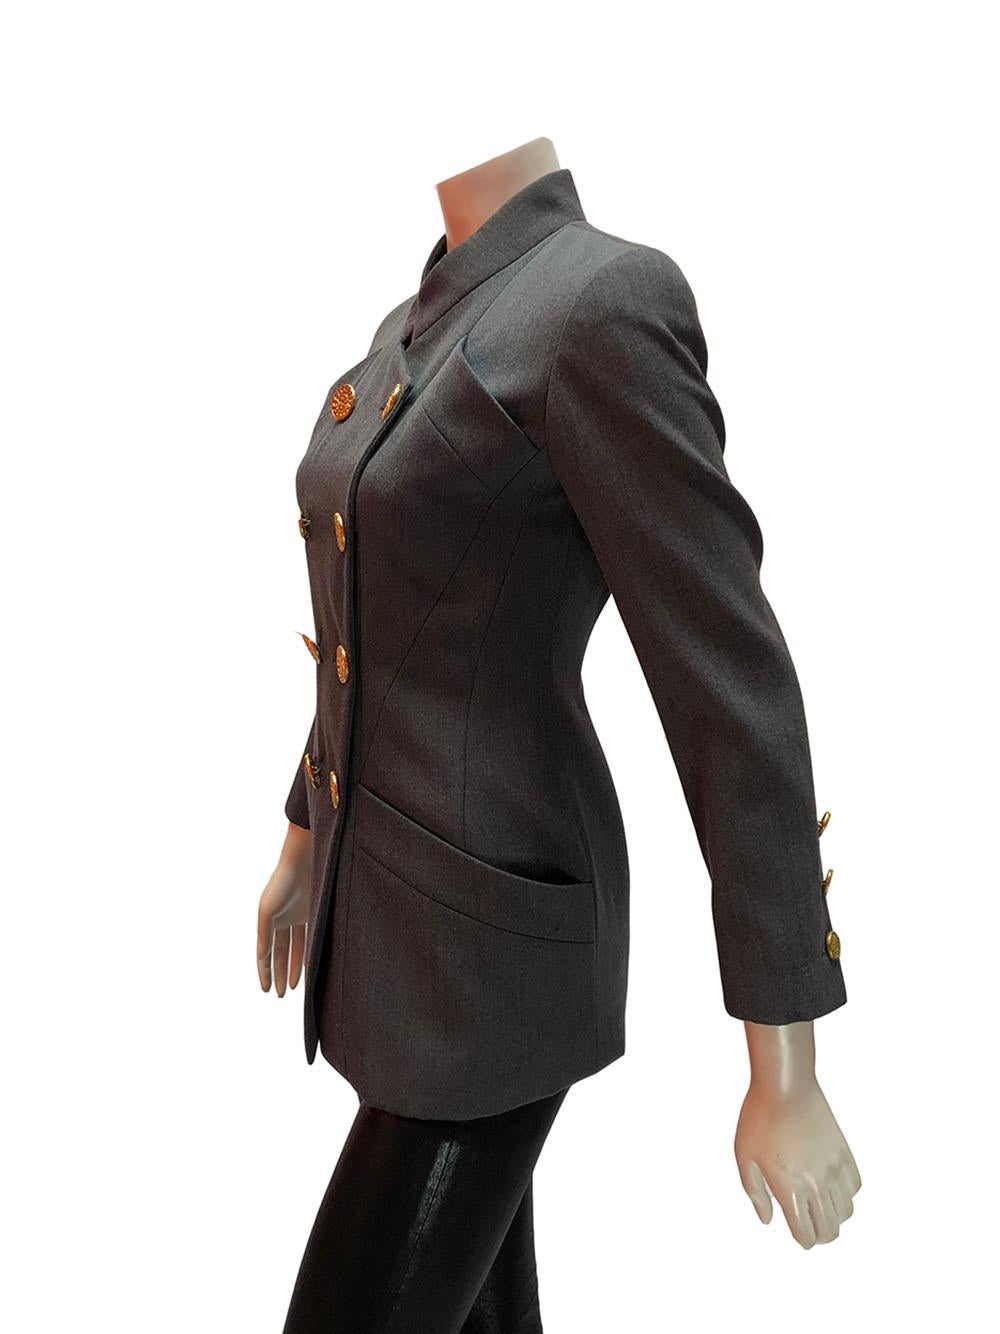 Grey structured military-style double breasted blazer by Chanel. The gold buttons have a chain detail. Two large hip pockets. Size 36. 
